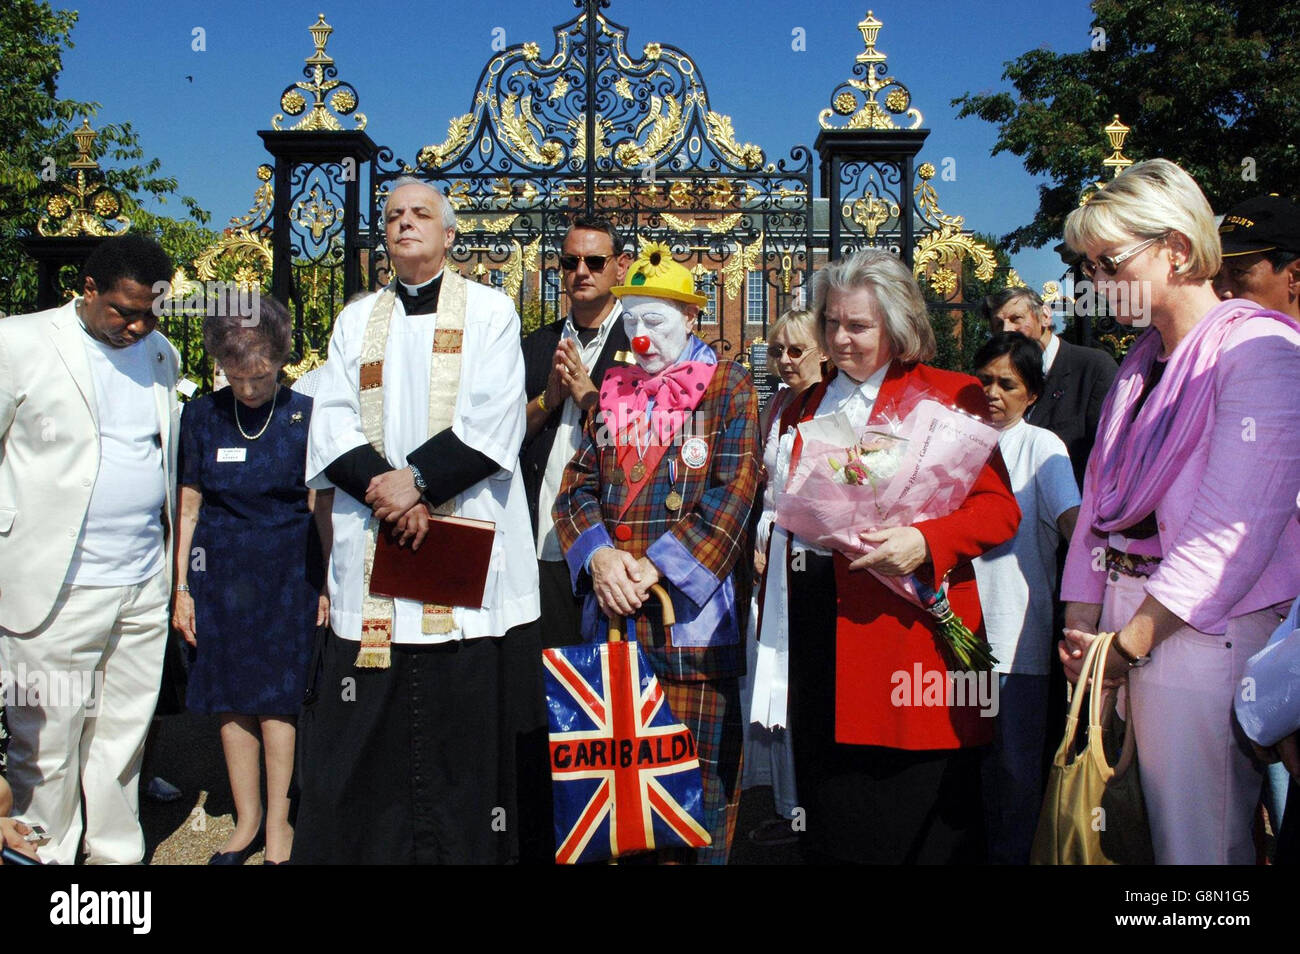 Fans of Diana, Princess of Wales share a minutes silence outside Kensington Palace with Father Frank Gelli, the former curate of nearby St Mary Abbots Church, Wednesday August 31, 2005. Tributes in memory of the Princess were tied to the gates of Kensington Palace today to mark the eighth anniversary of her death. See PA story ROYAL Diana. PRESS ASSOCIATION photo. Photo credit should read: Fiona Hanson/PA. Stock Photo